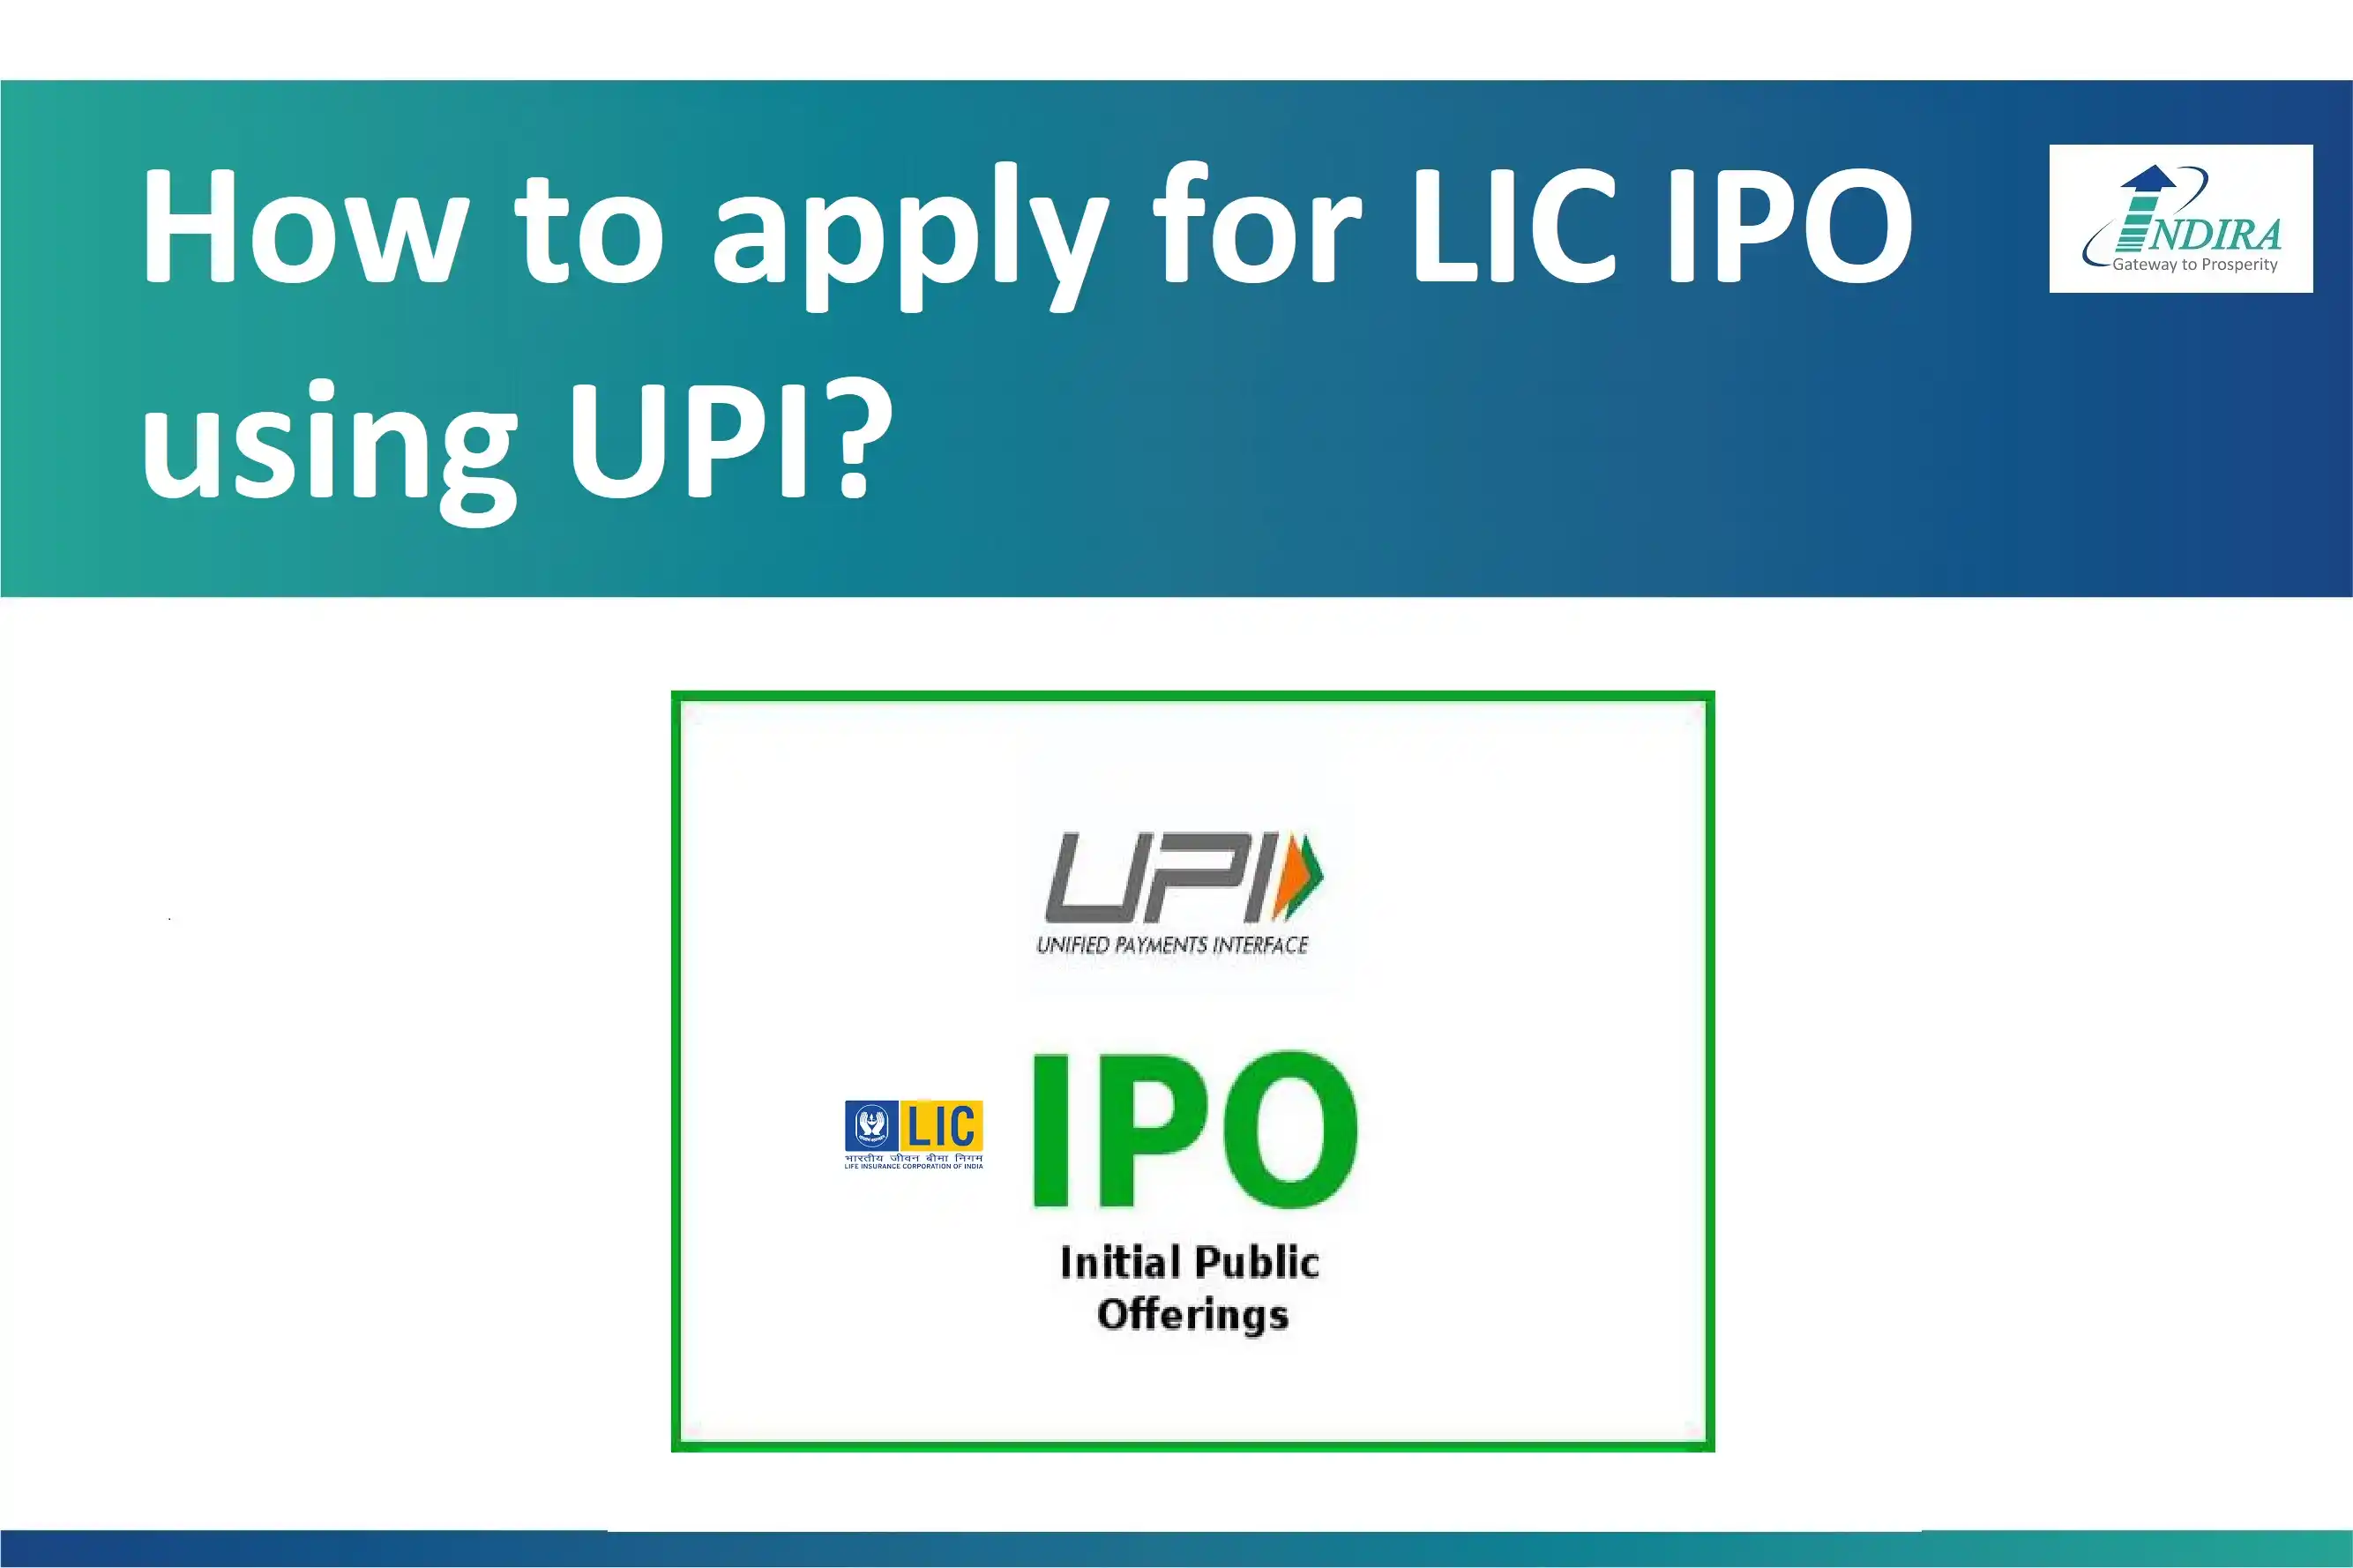 How to apply for LIC IPO using UPI?